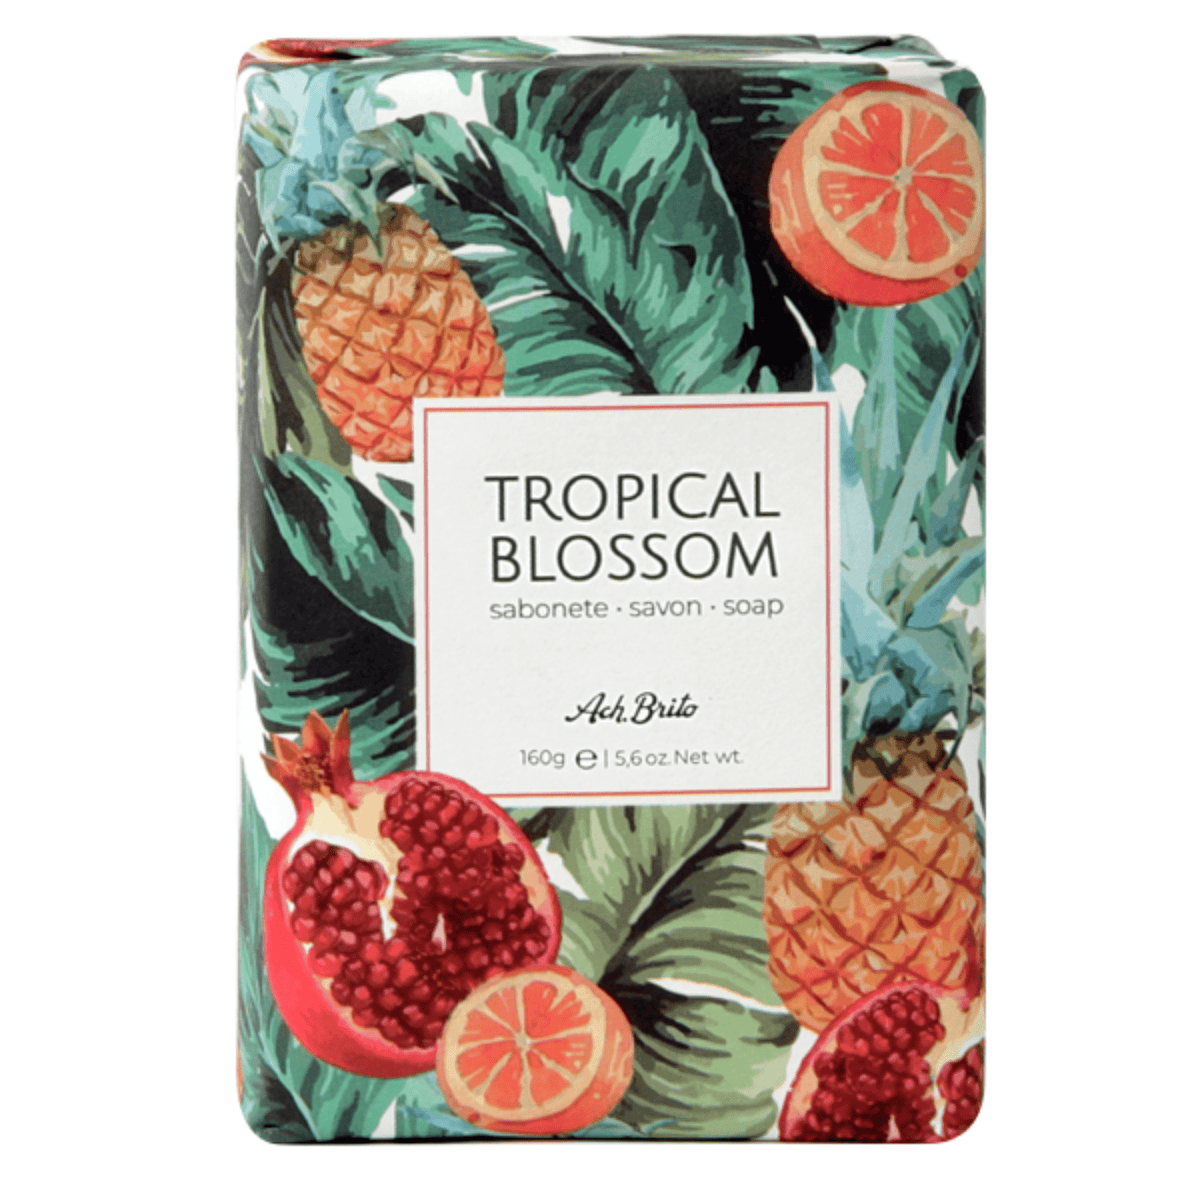 Primary Image of Tropical Blossom Soap